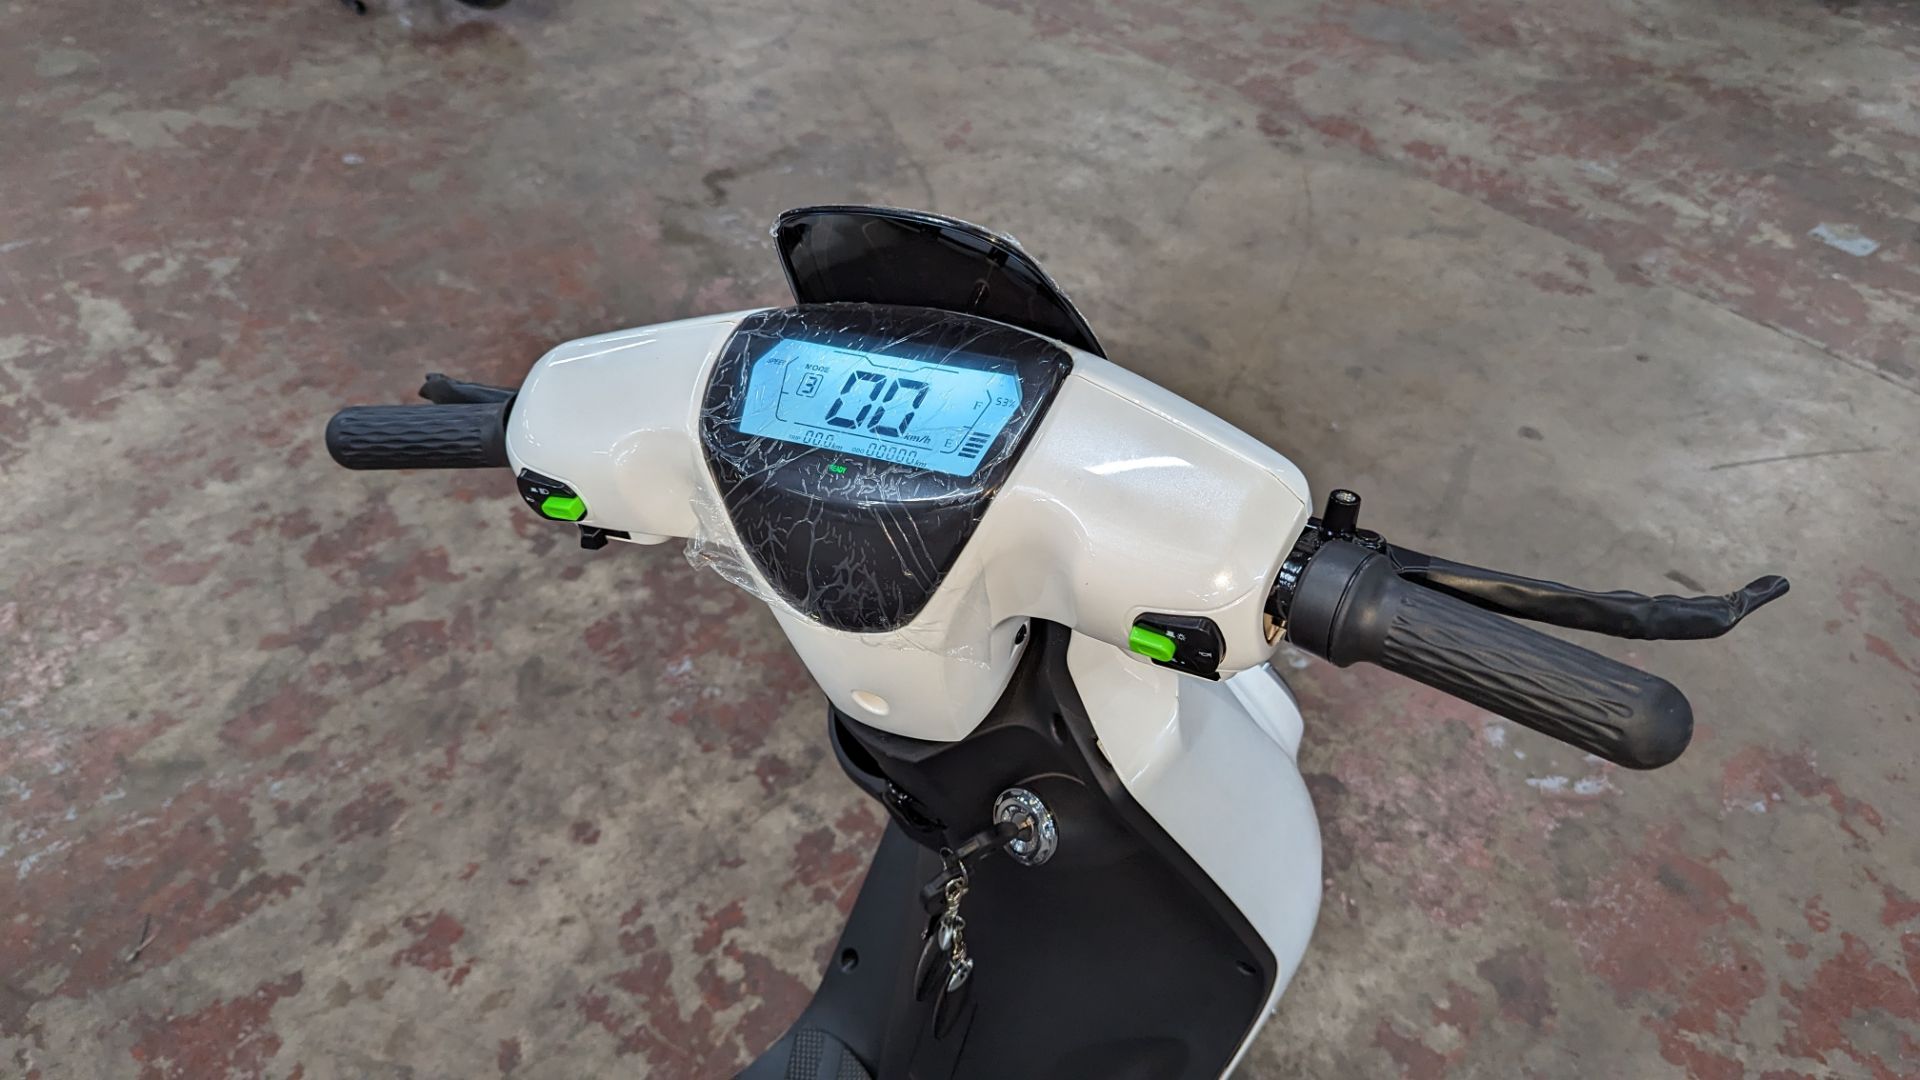 Model 18 Electric Bike: Zero (0) recorded miles, white body with black detailing, insulated box moun - Image 10 of 15